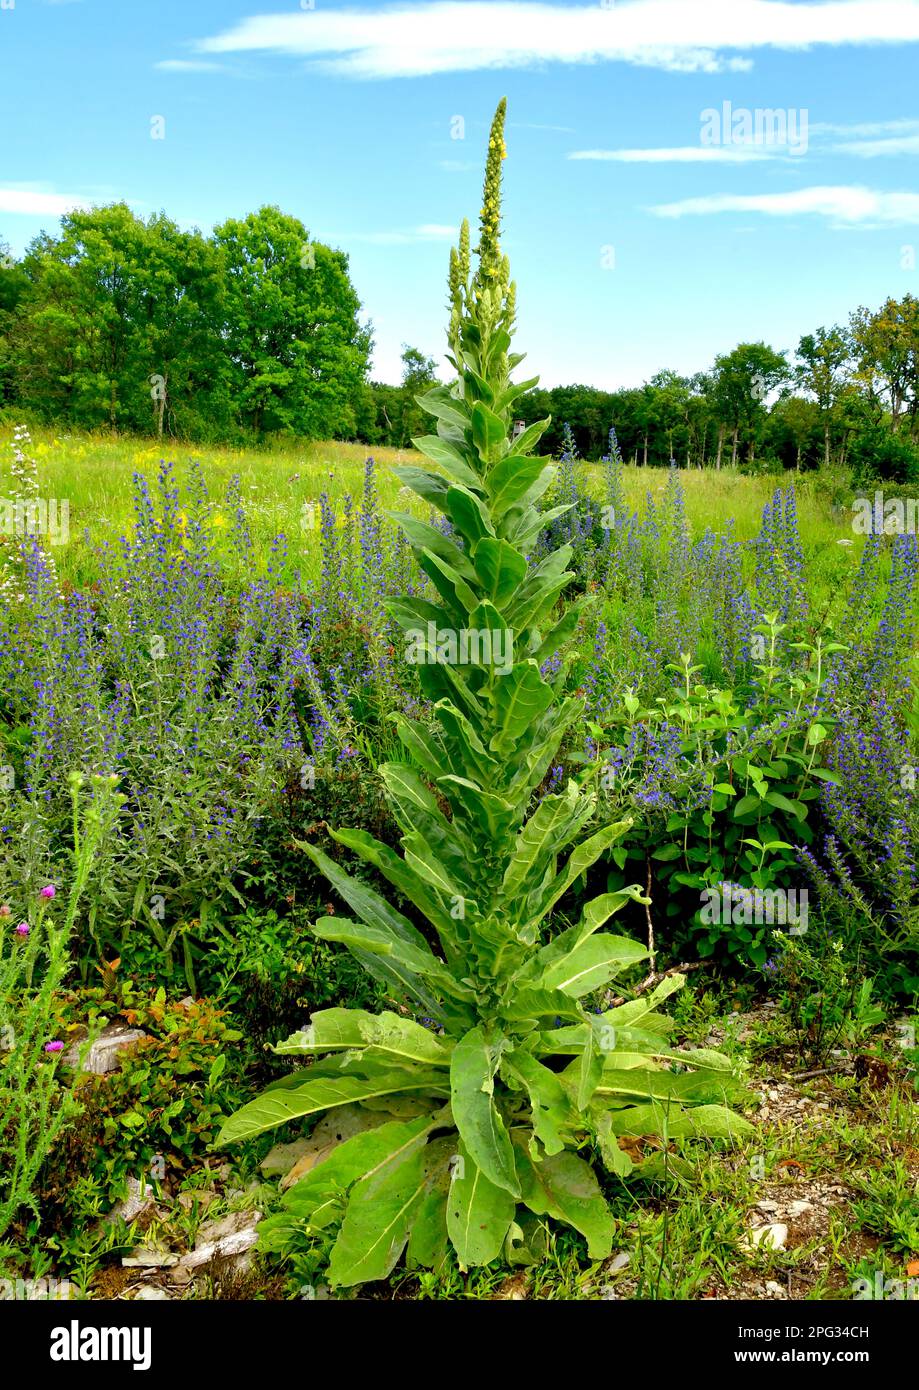 Common Mullein or Great Mullein (Verbascum thapsus). Single flowering plant. Germany Stock Photo